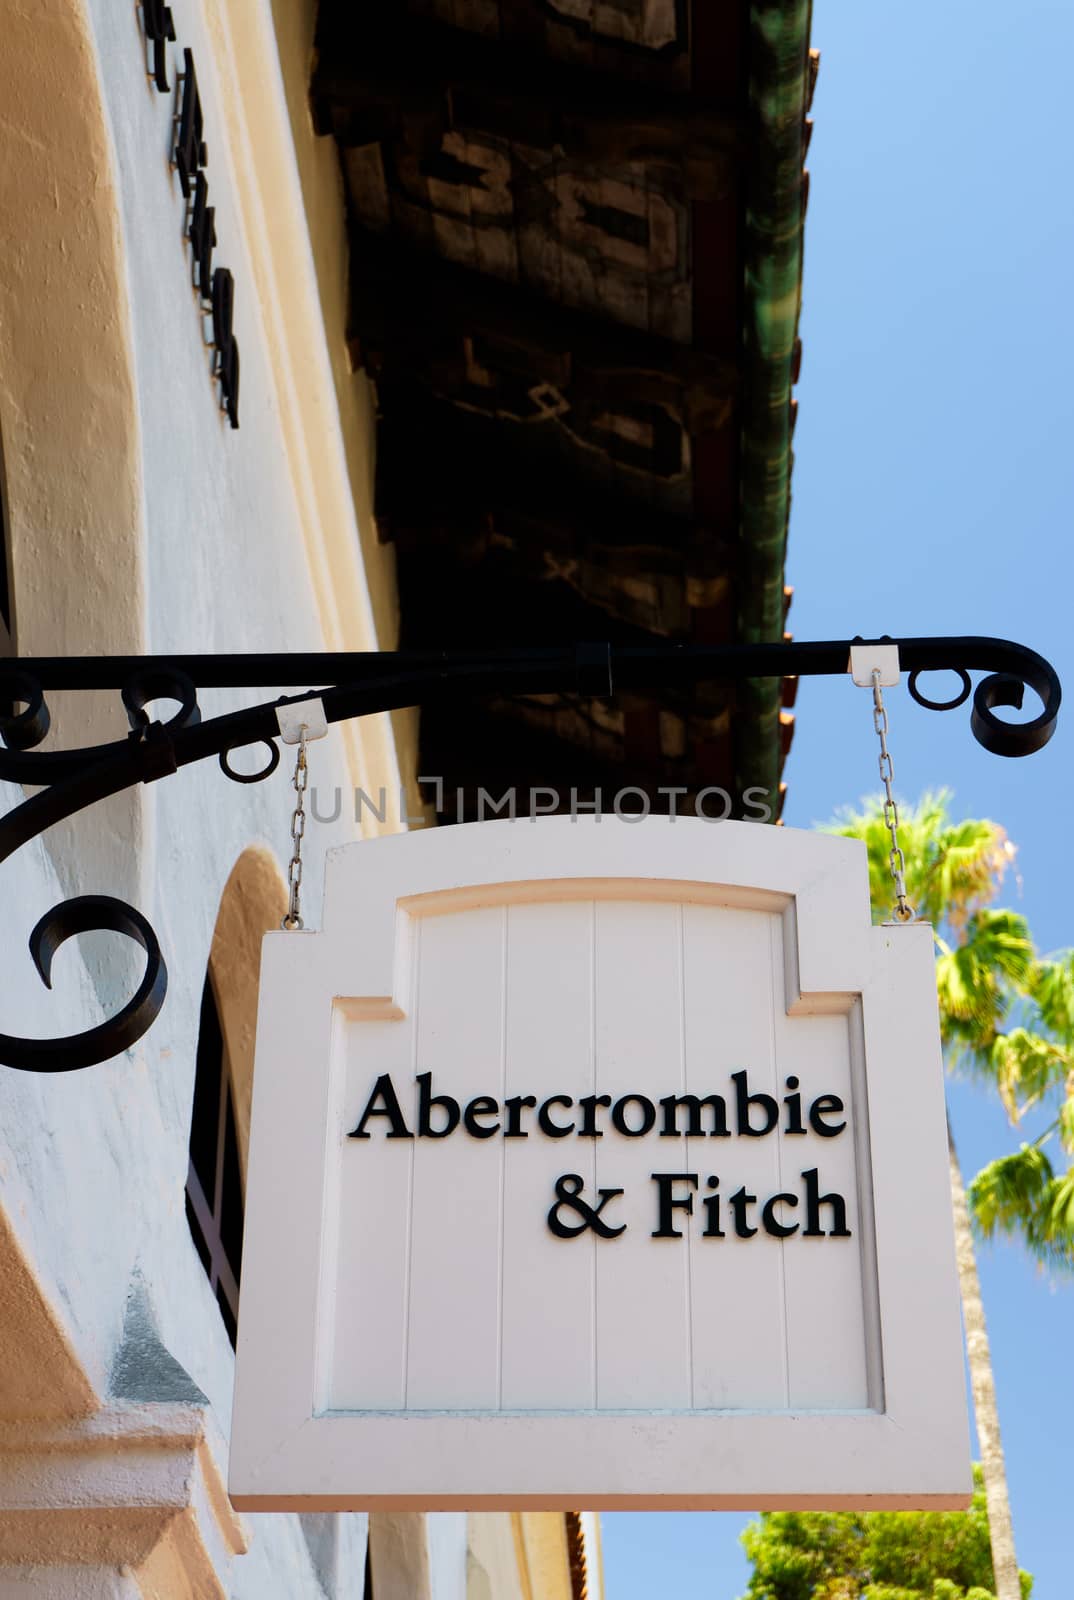 SANTA BARBARA, CA/USA - JULY 26, 2015: Abercrombie & Fitch store and sign. Abercrombie & Fitch is an upscale American retailer that focuses on casual wear for young consumers.